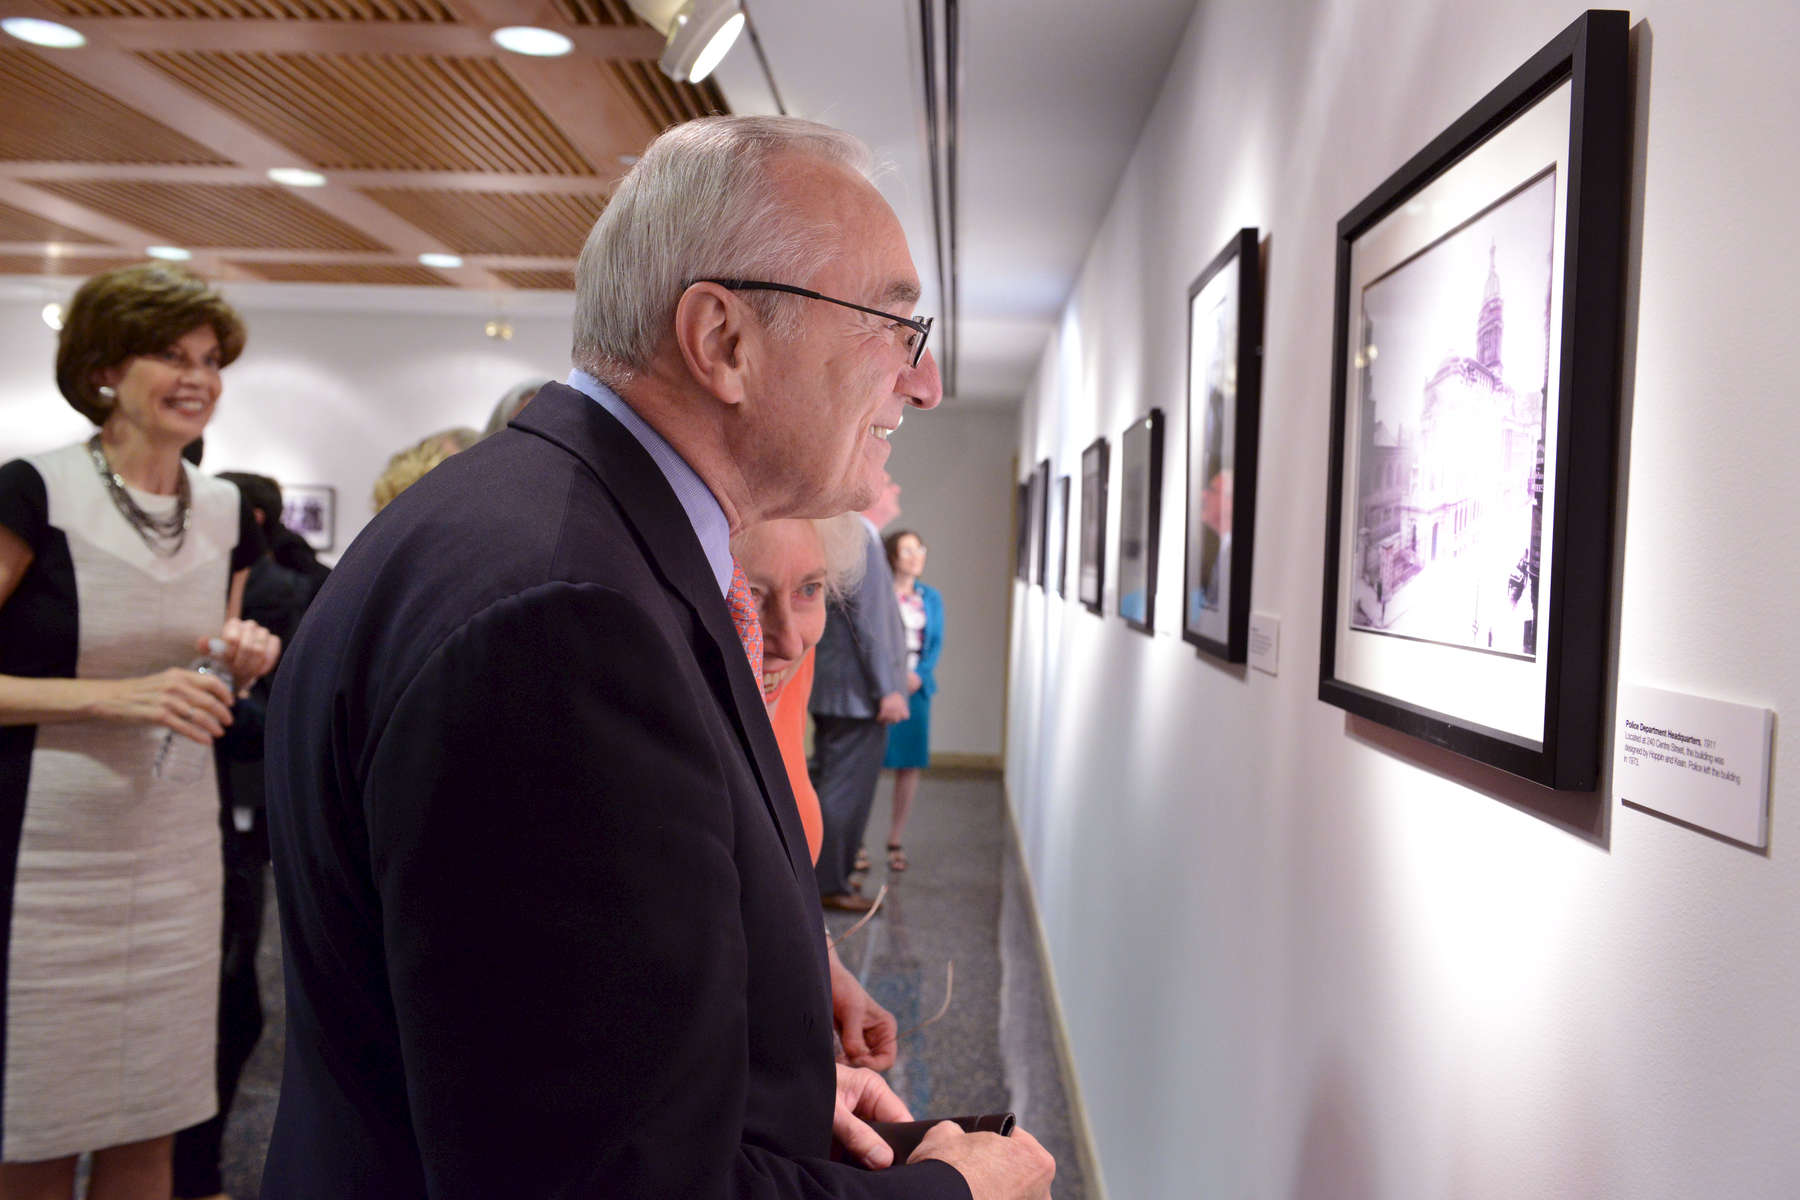 NYPD Police Commissioner William Bratton views an exhibit {quote}A Photographic History of the N.Y.P.D.{quote} which opened on Monday June 9, 2014 at the Eastern District Courthouse Charles Sifton Gallery. At left is EDNY Chief Judge Carol Amon.